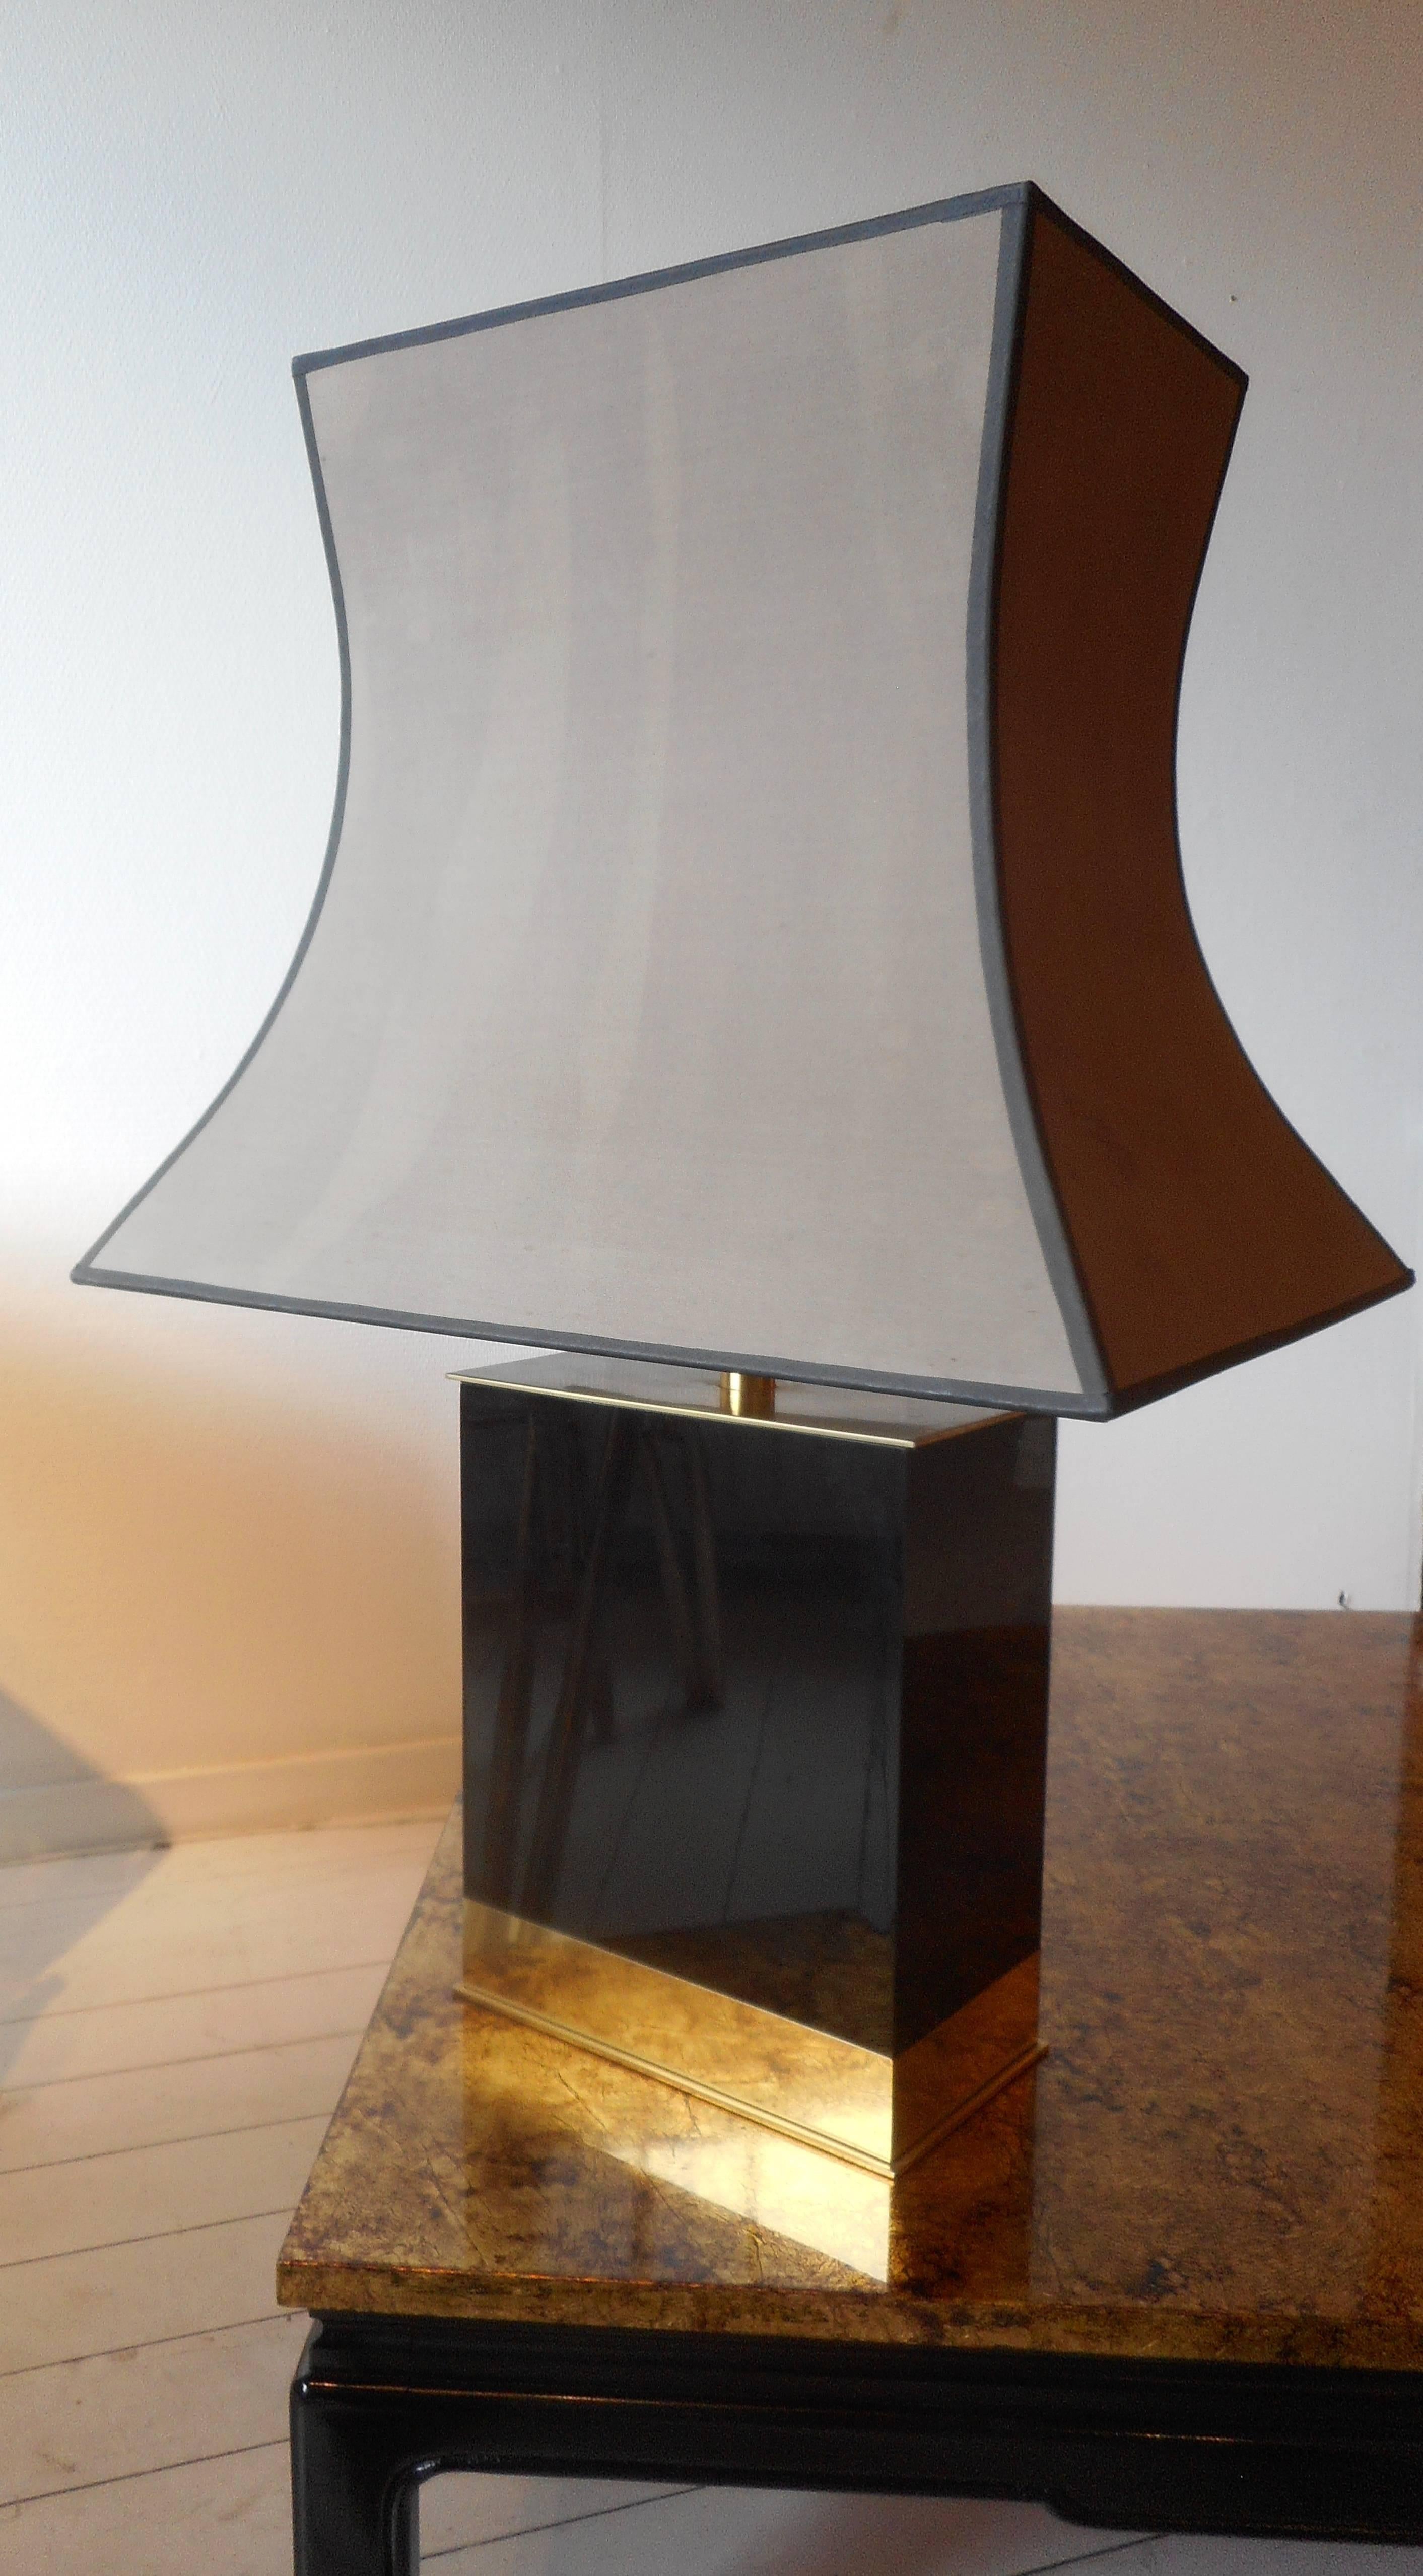 Black lacquer wood with brass accents.
One light, with his pagoda silk shade (gold interior),
circa 1970.